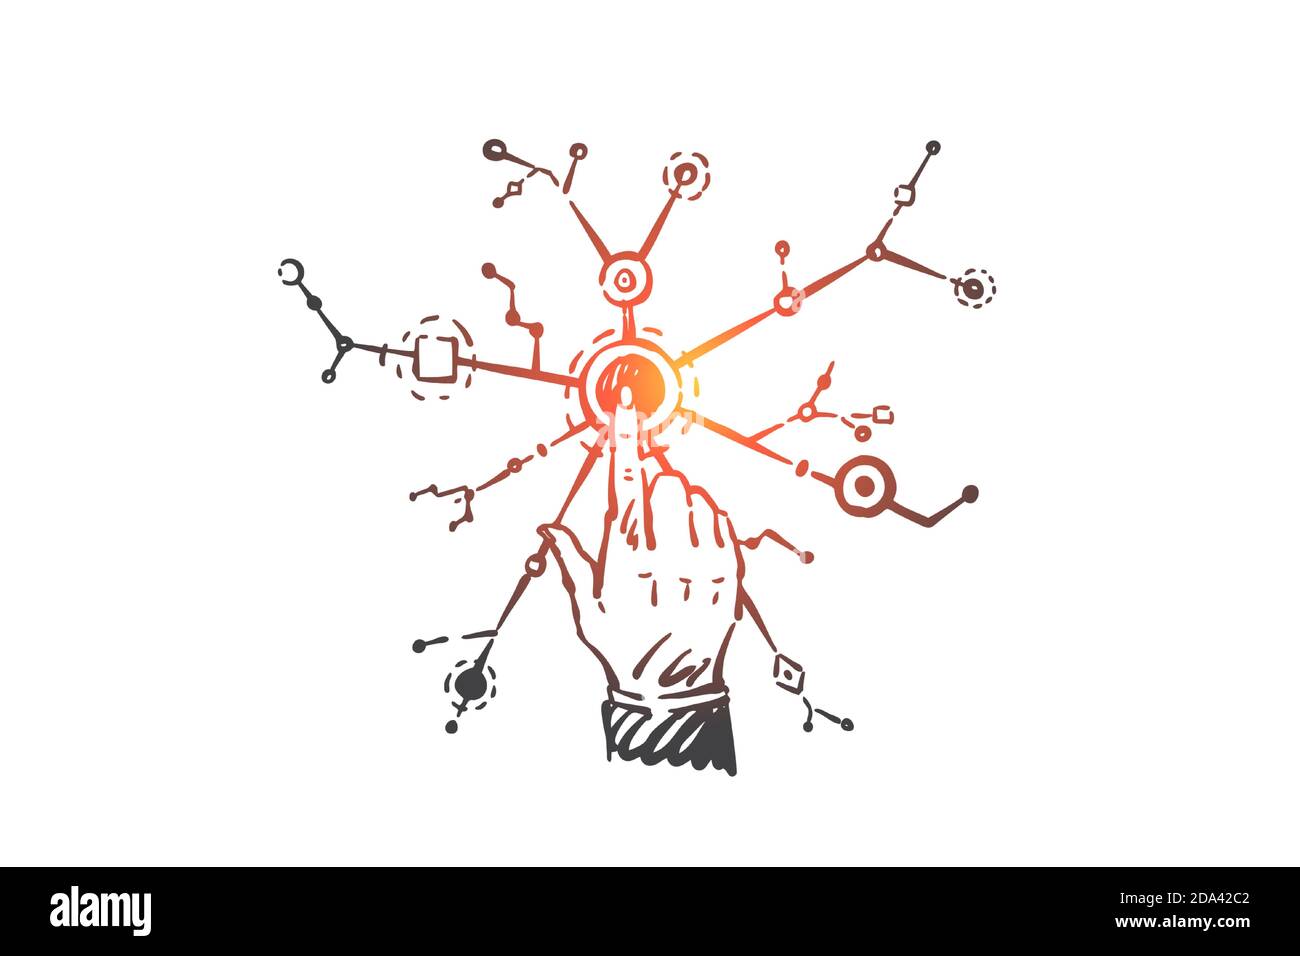 Networking, connectivity, branching concept sketch. Hand drawn isolated vector Stock Vector